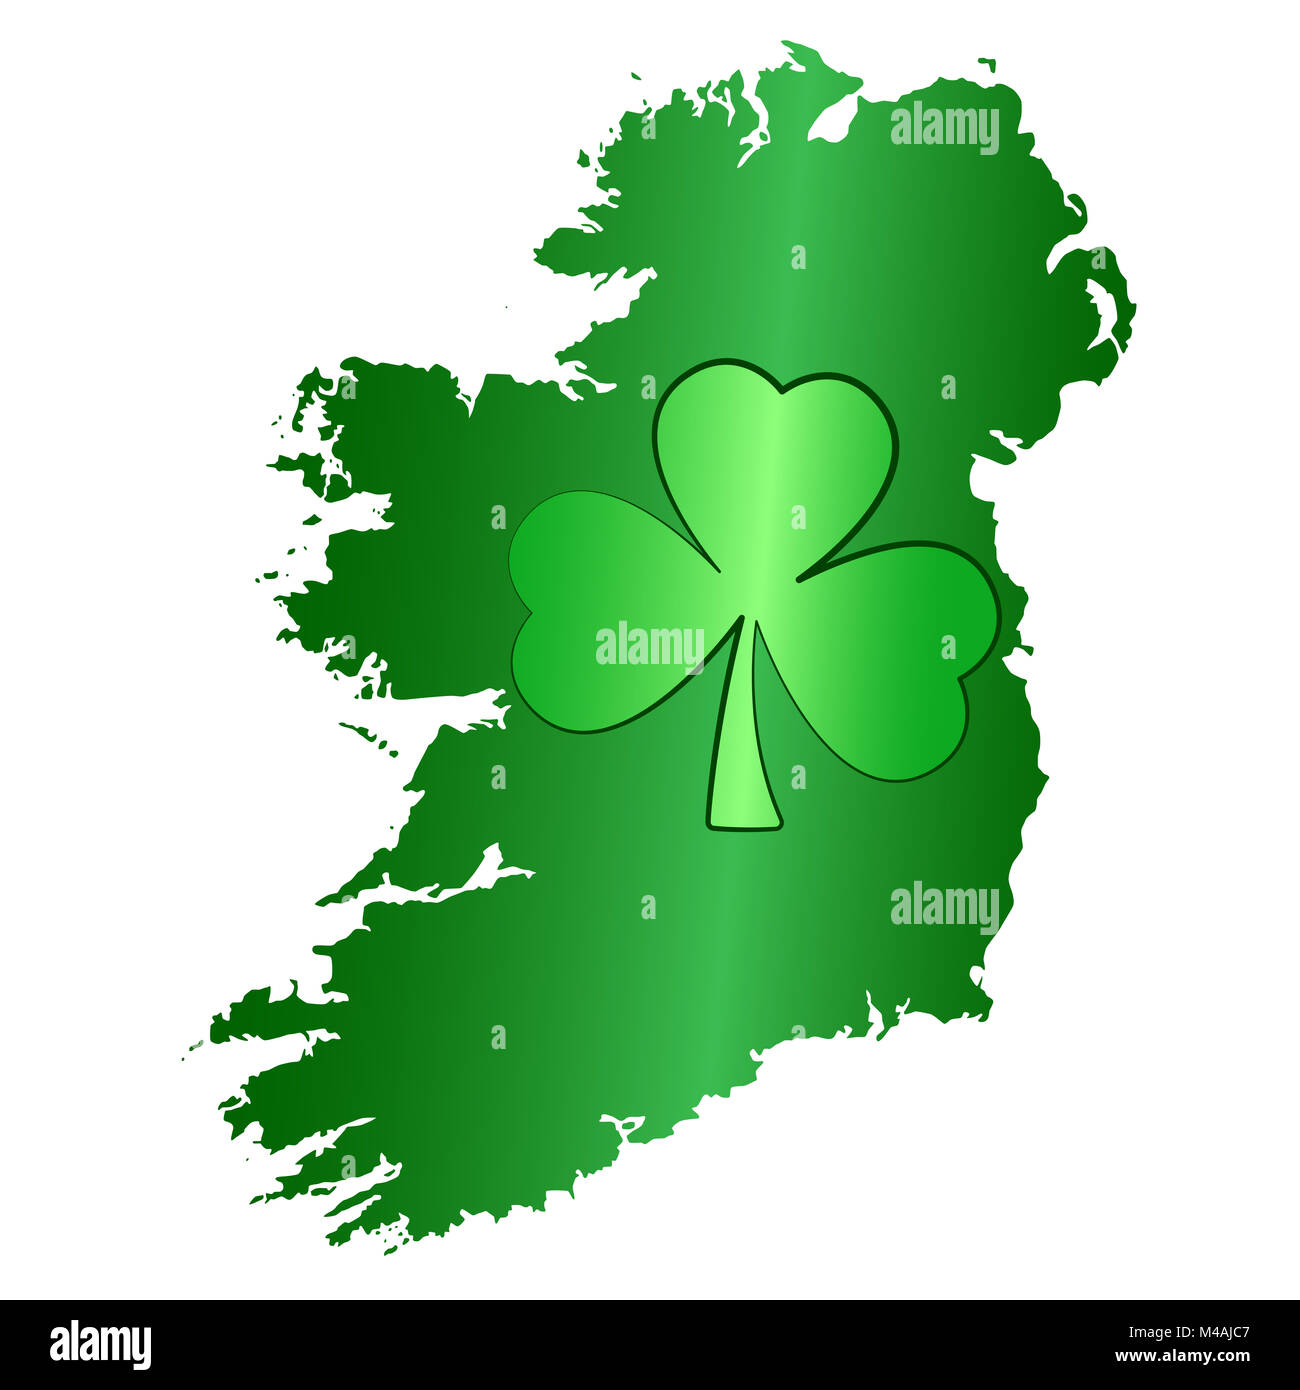 Green shamrock symbol and Ireland island silhouette. Image for Saint Patricks Day, also called Feast of Saint Patrick, celebrated on March seventeen. Stock Photo